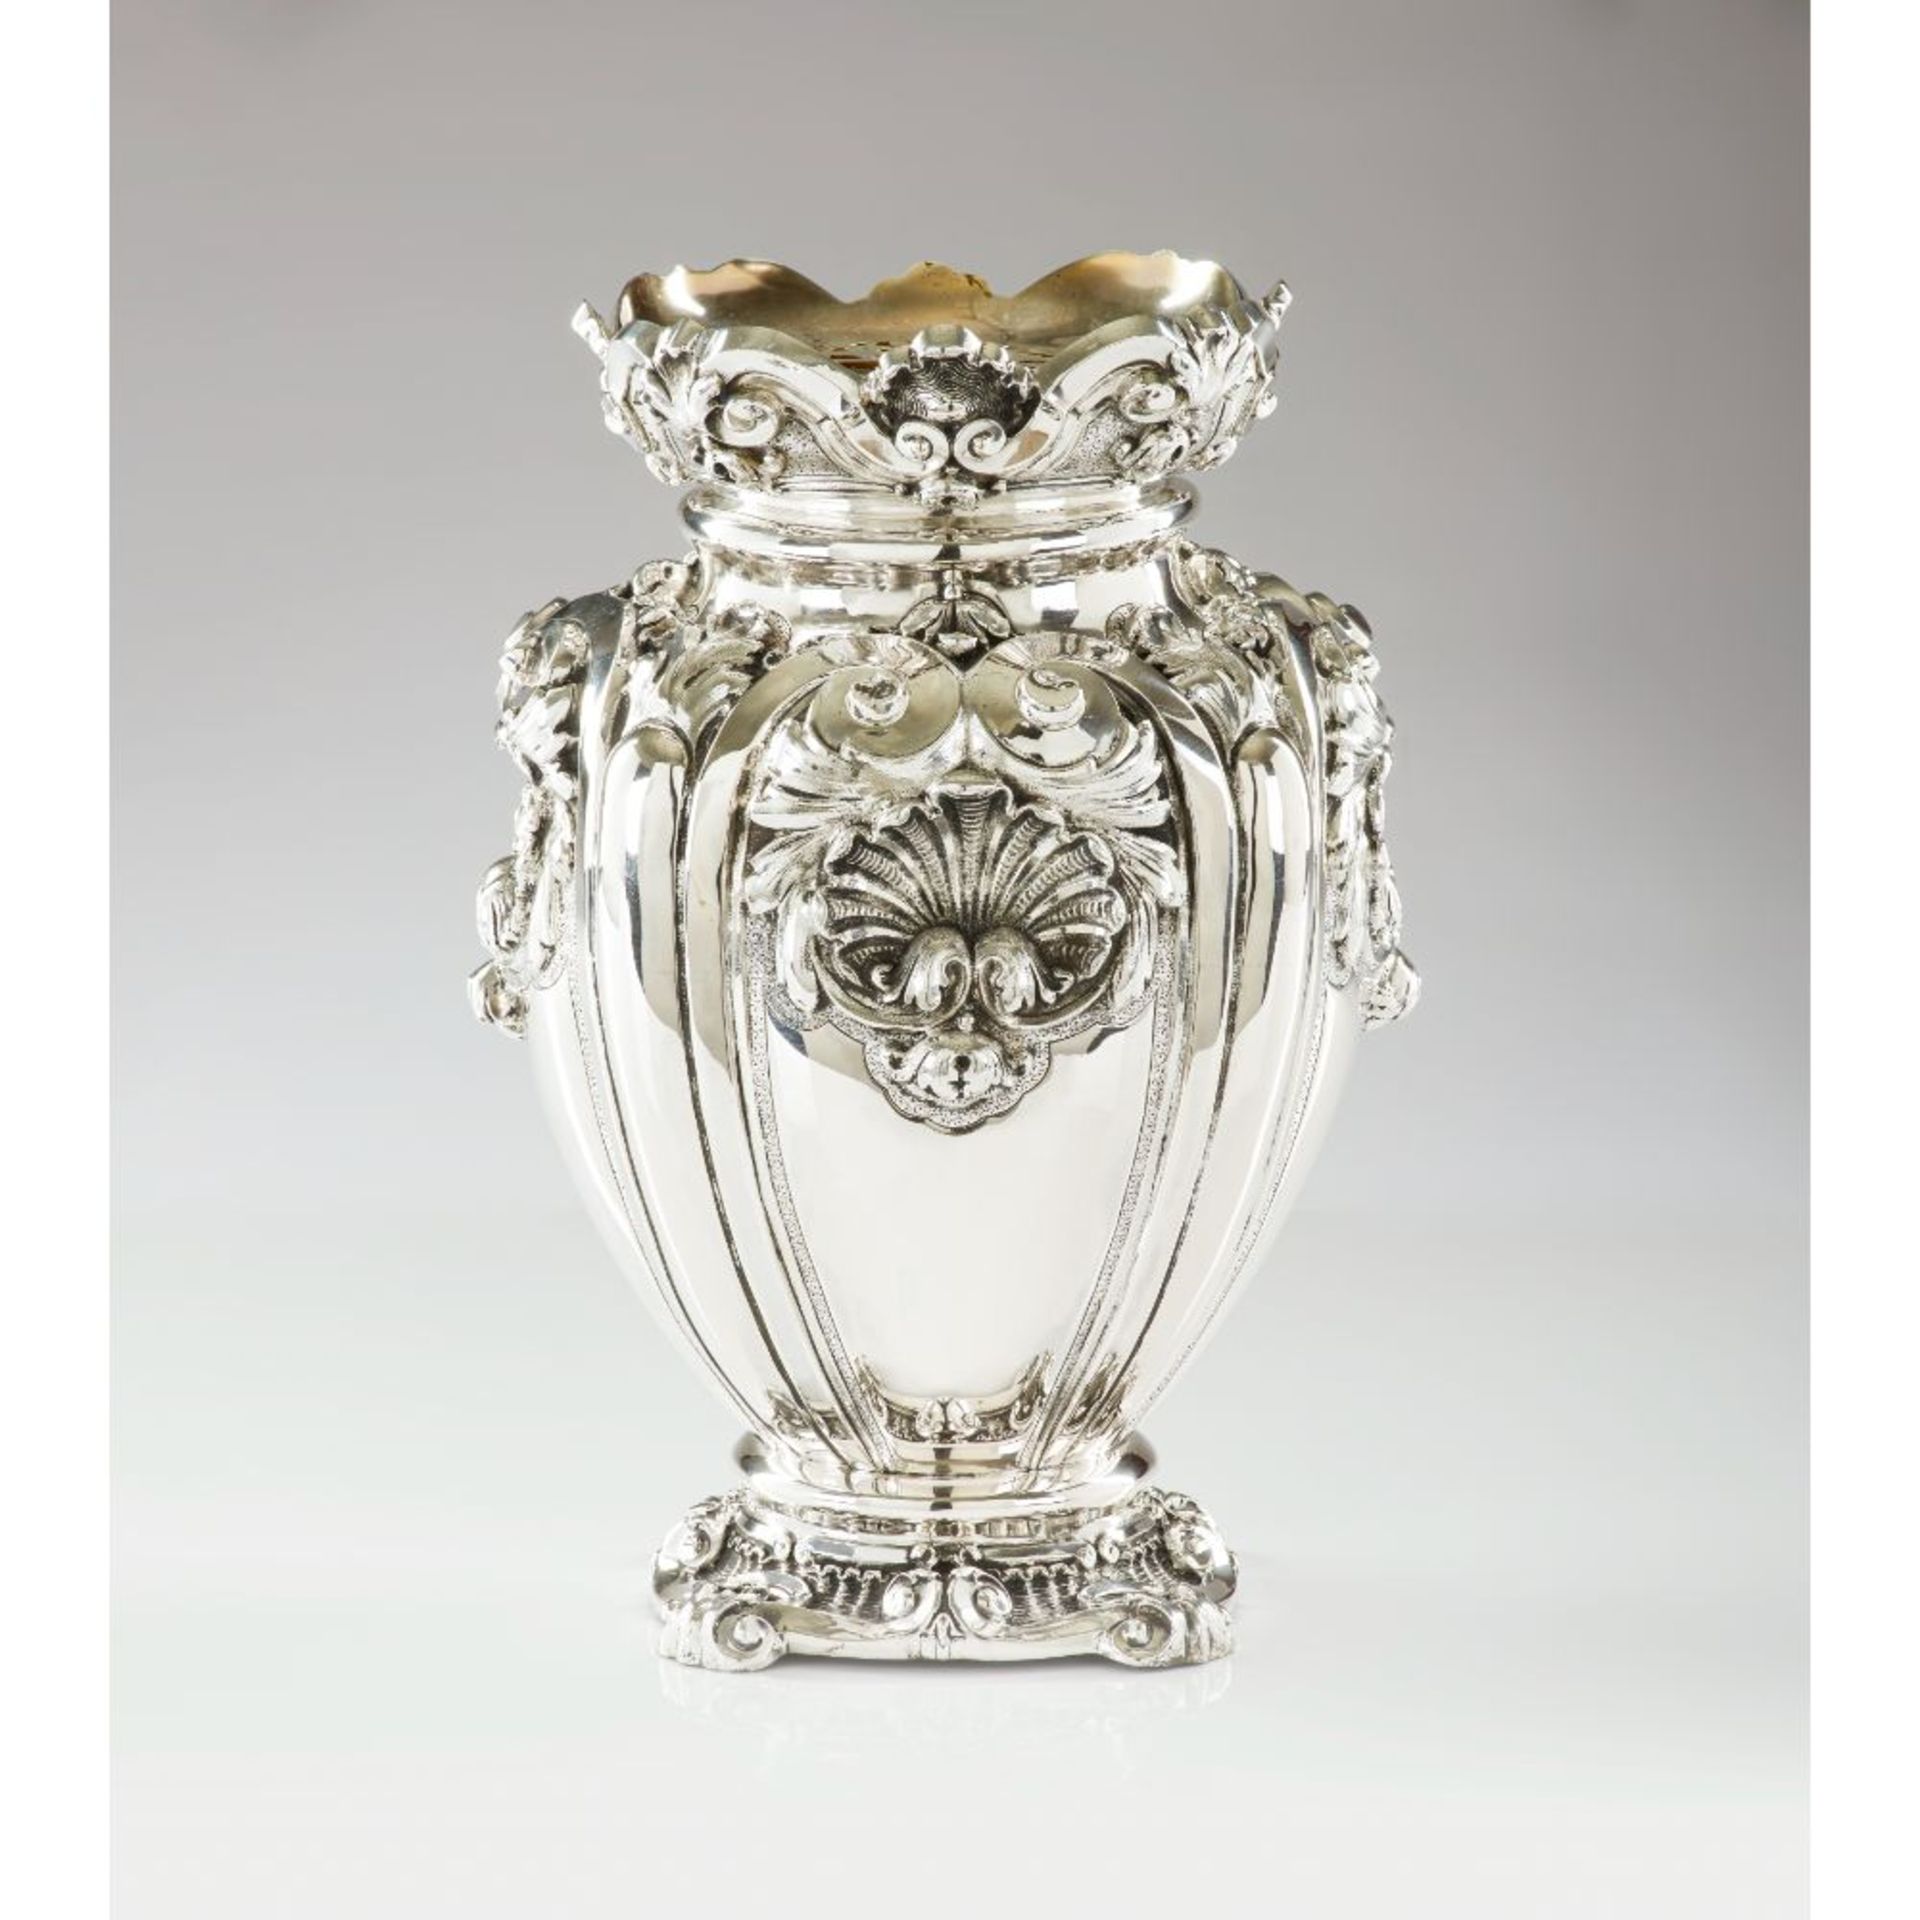 A large vase, Silver 833/000, Profuse reliefs decoration of shells and volutes, Oporto hallmark (